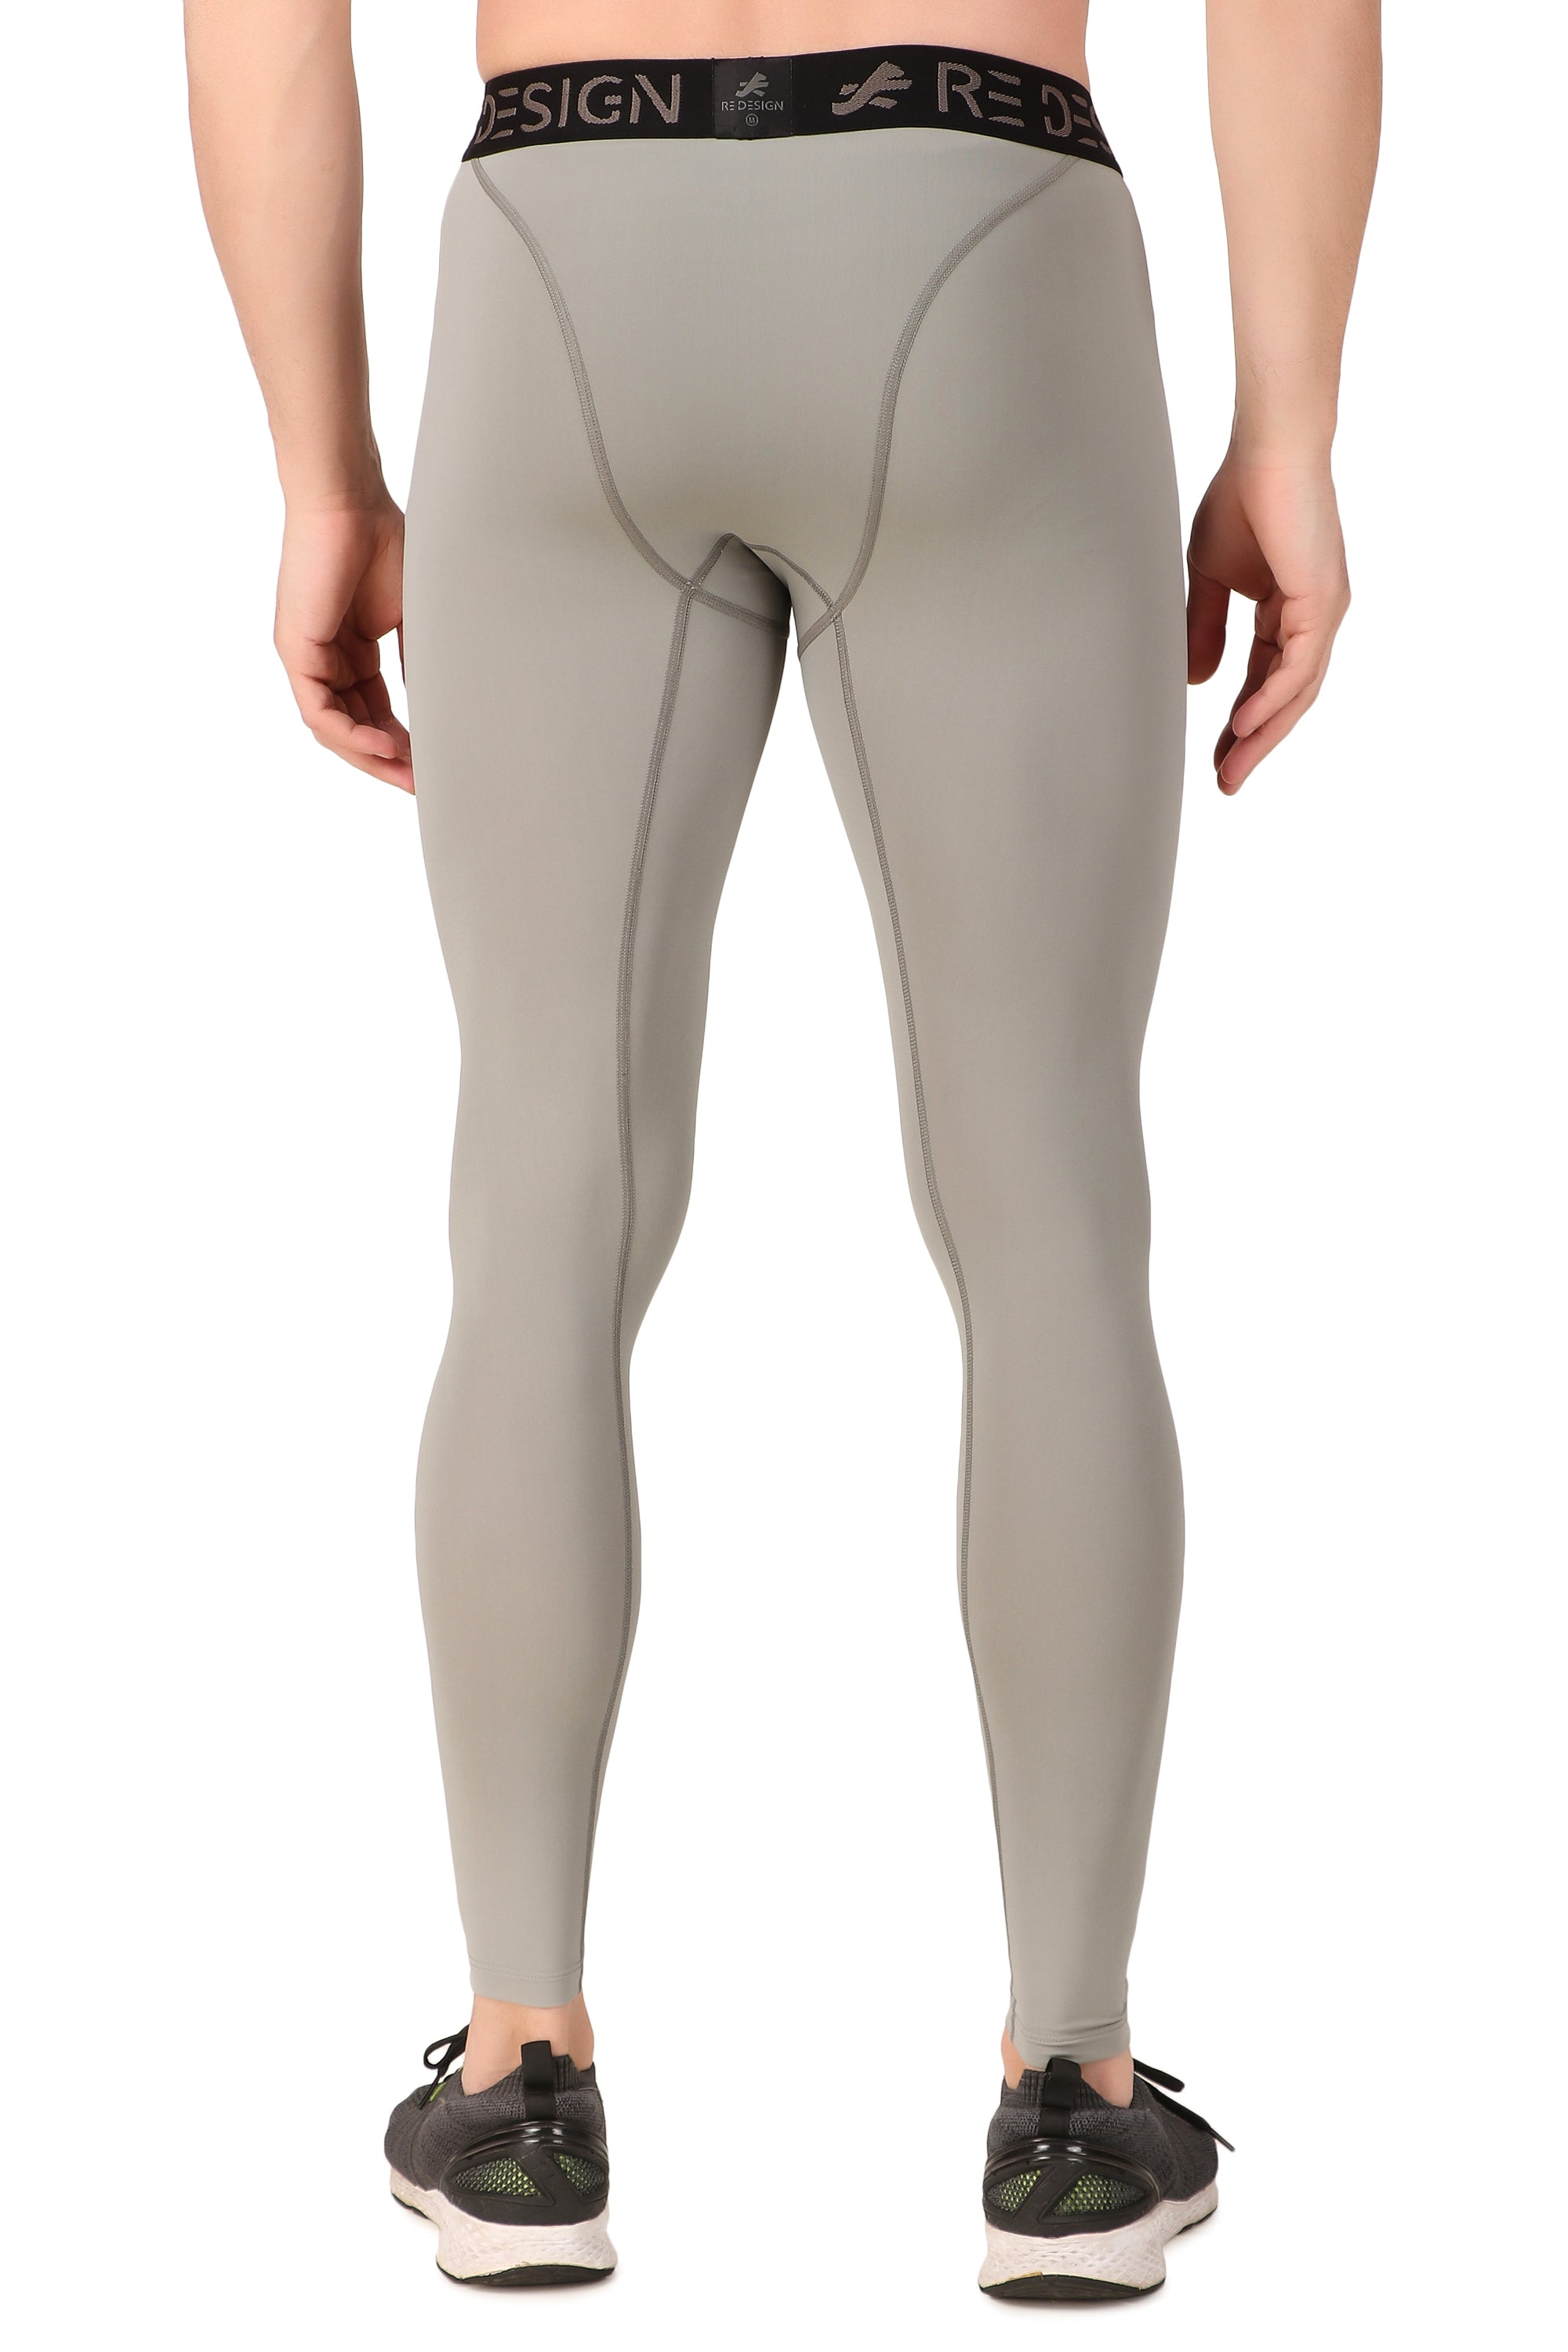 Nylon Compression Pant and Full Tights For Men (Light Grey) – ReDesign  Sports